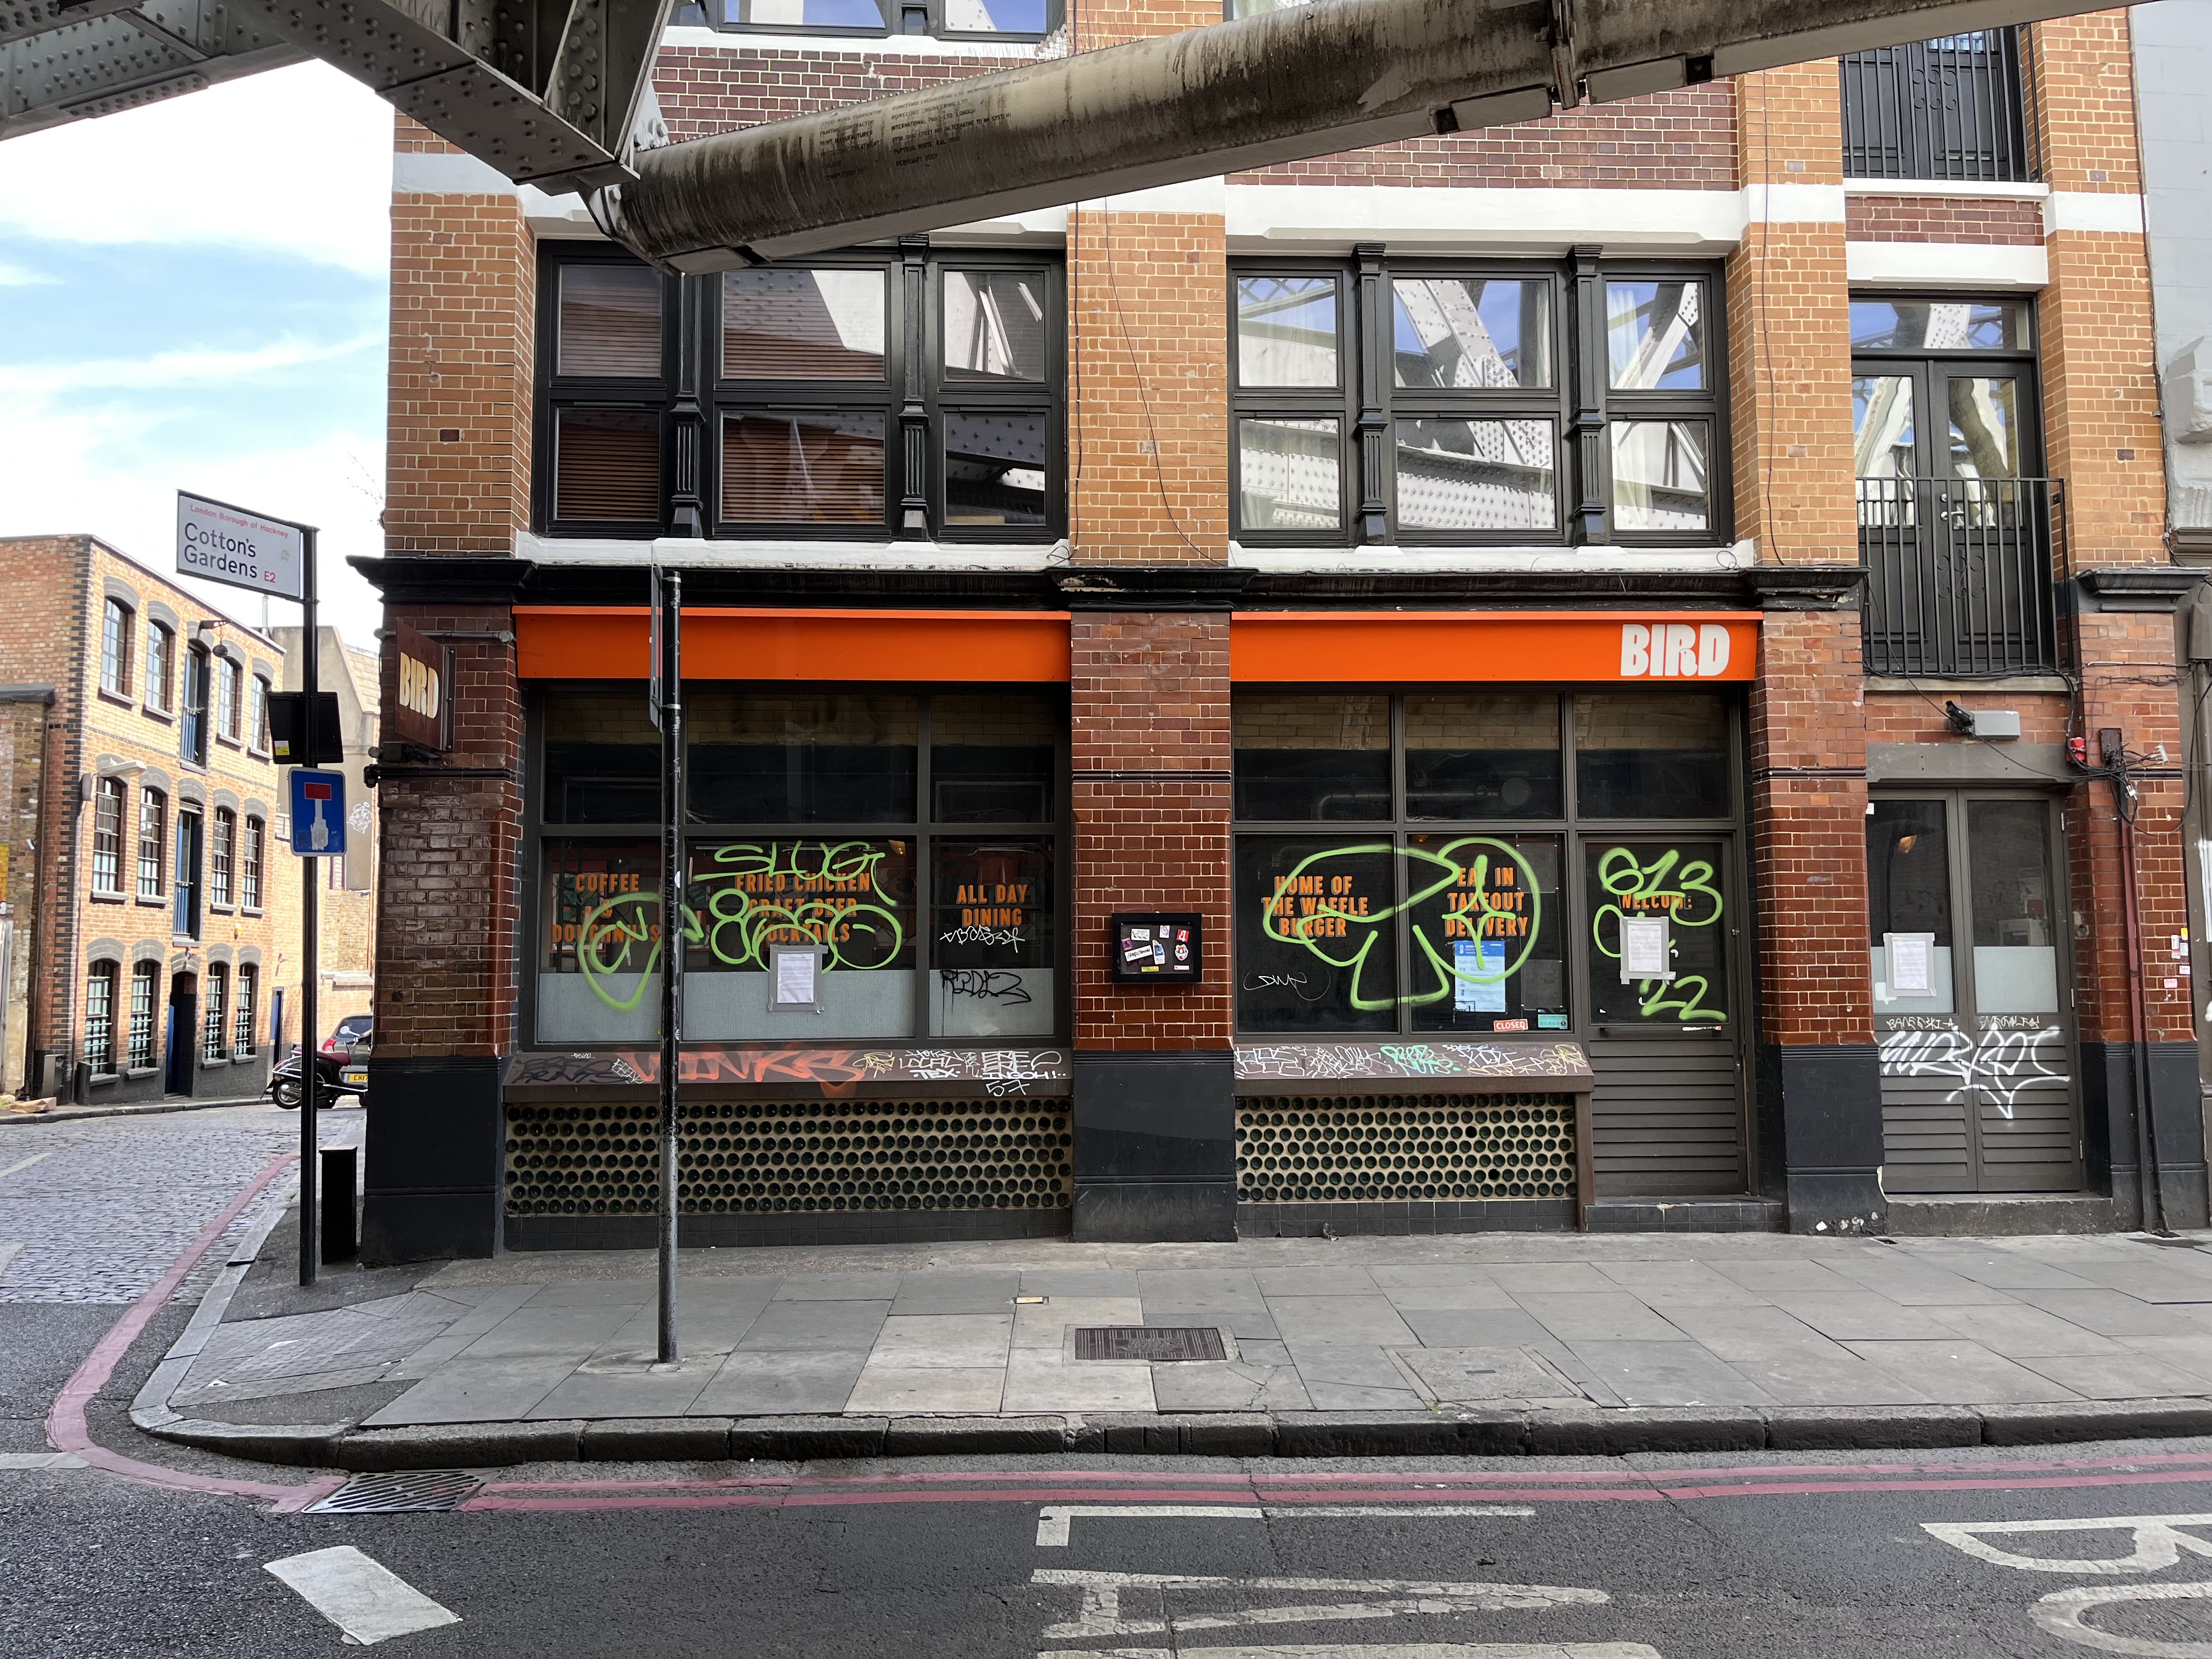 Bird restaurant on Kingsland Road in Shoreditch has been taken over by Gordon Ramsay’s group for an iteration of the Lucky Cat brand